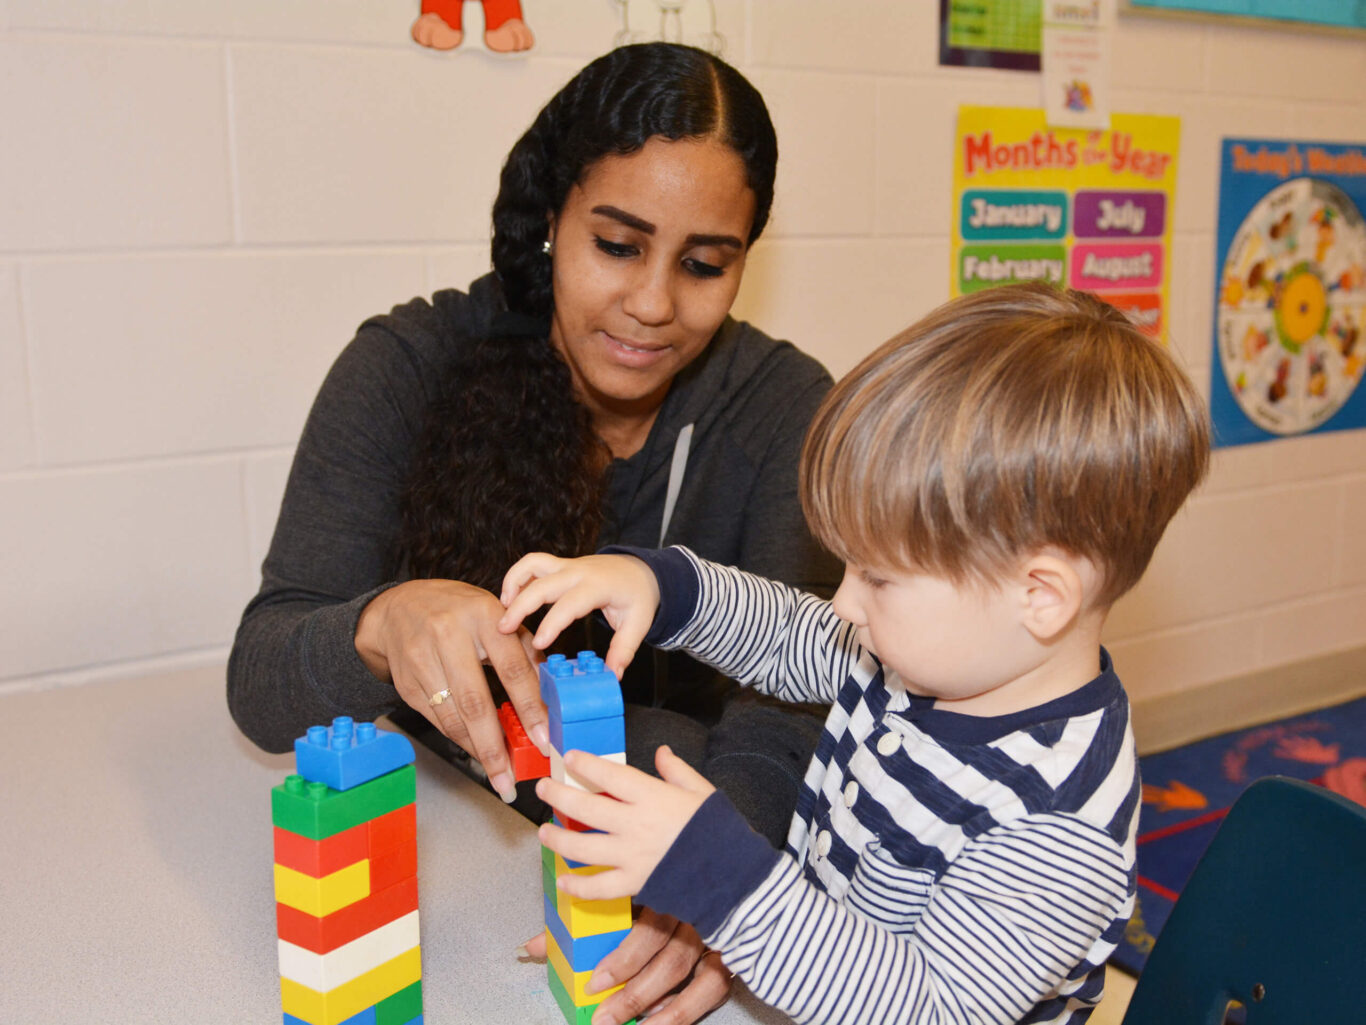 A preschooler and adult playing with legos in a classroom.